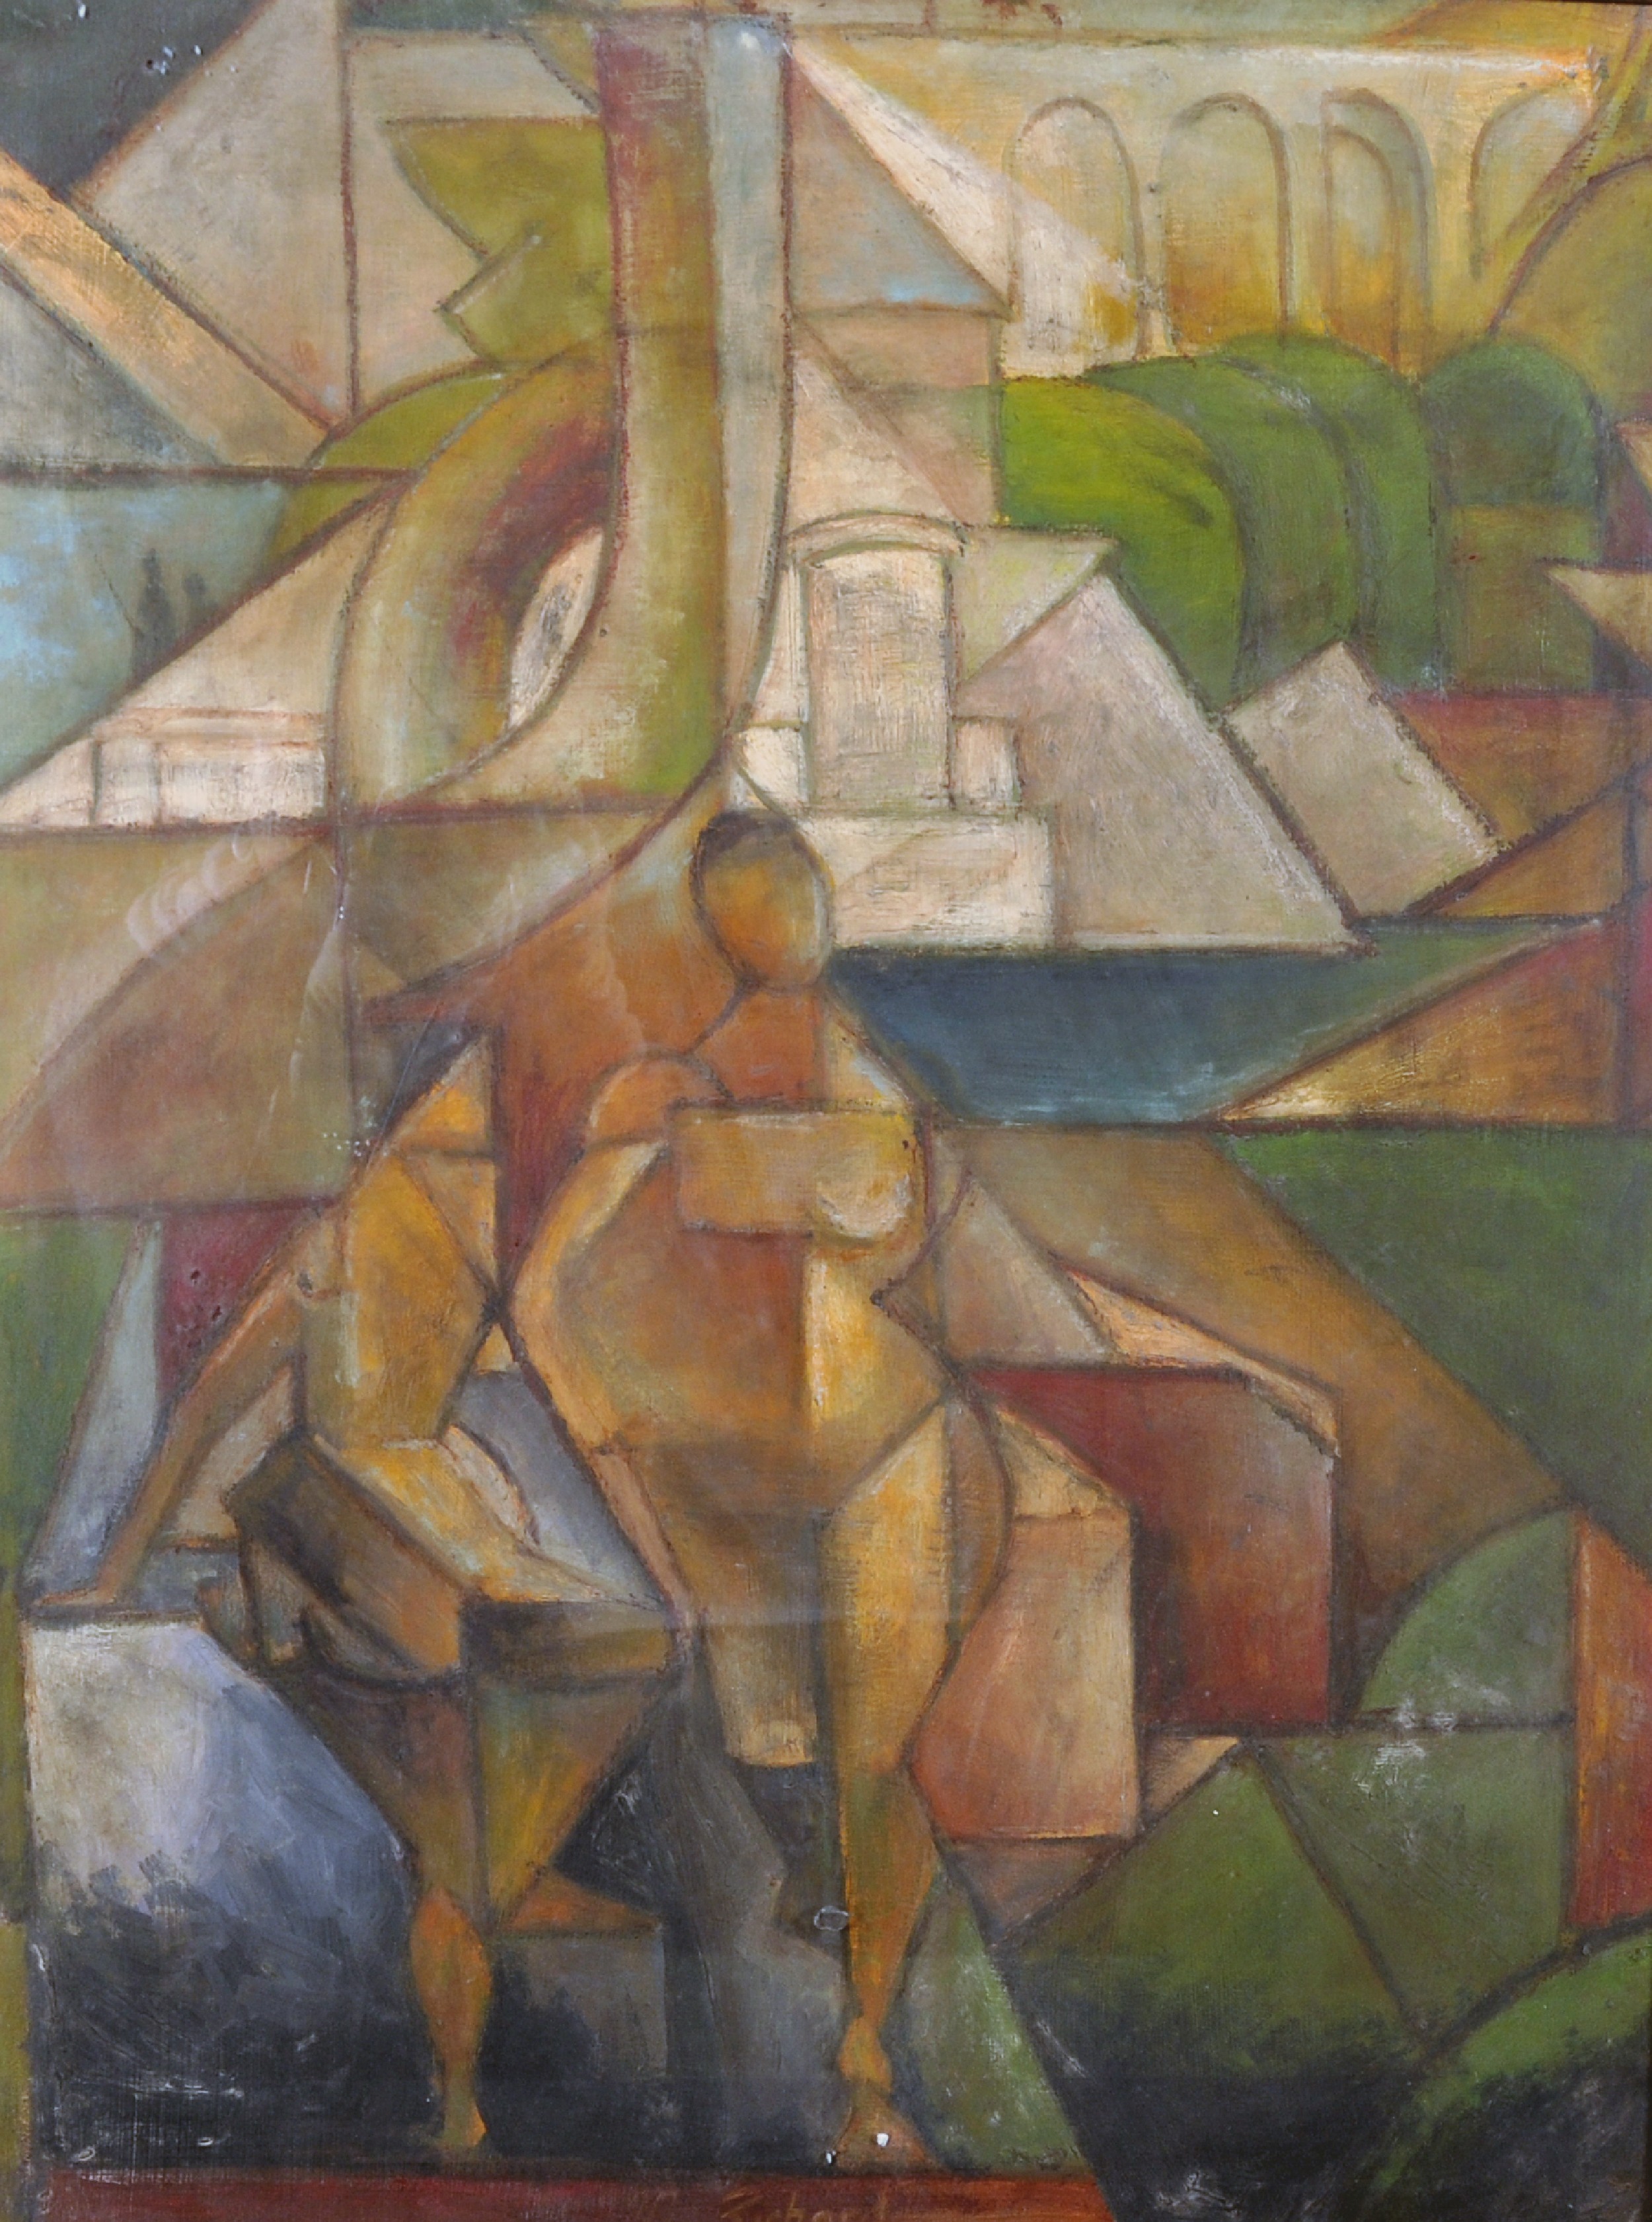 20th Century French School. Untitled, Oil on Board, Signed 'N Richard', 29" x 22".